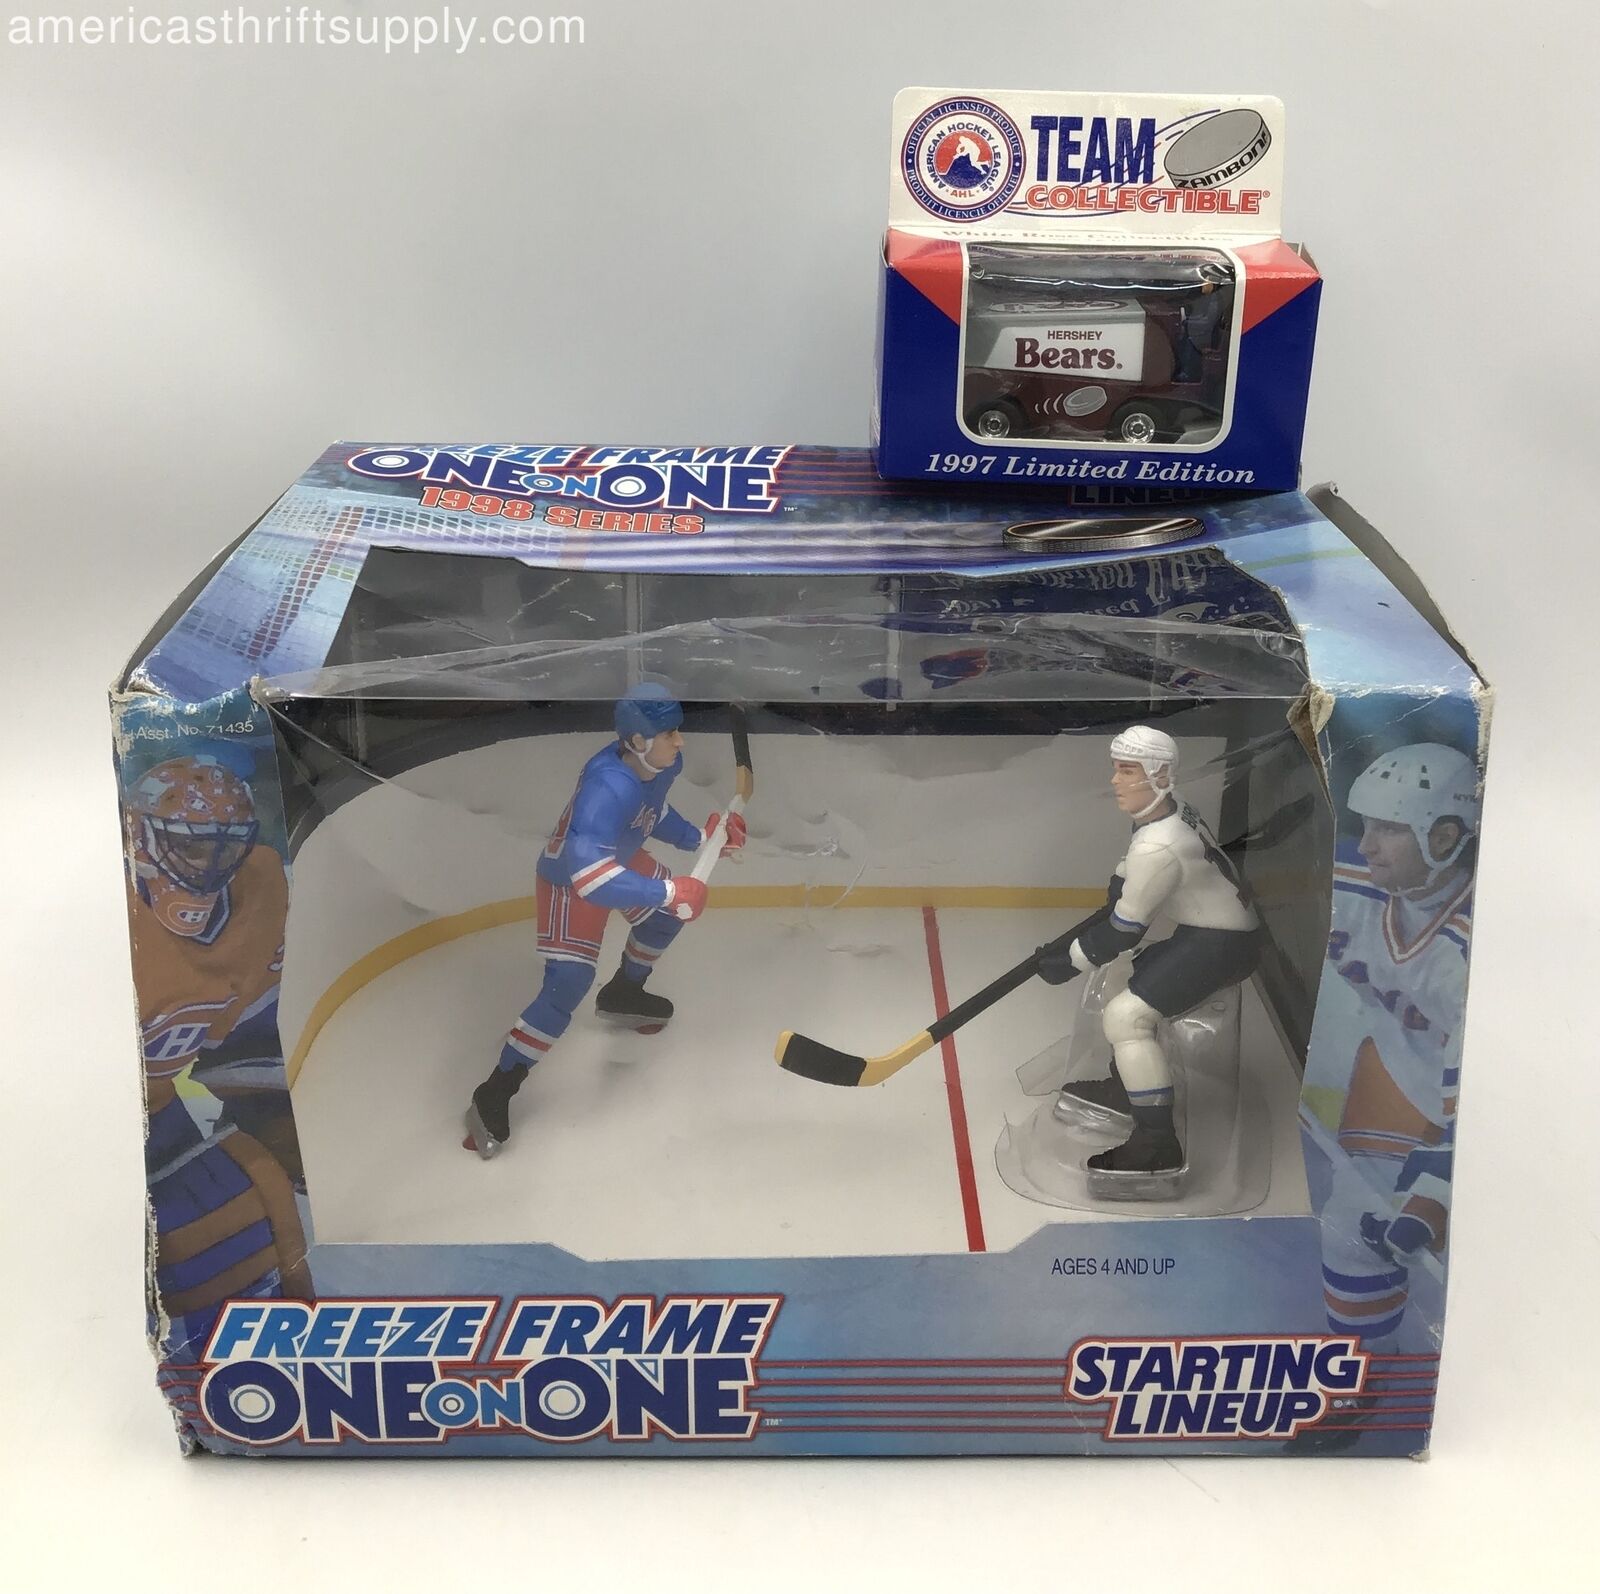 New In Box Kenner Hockey Players Figurines & Other Collectibles